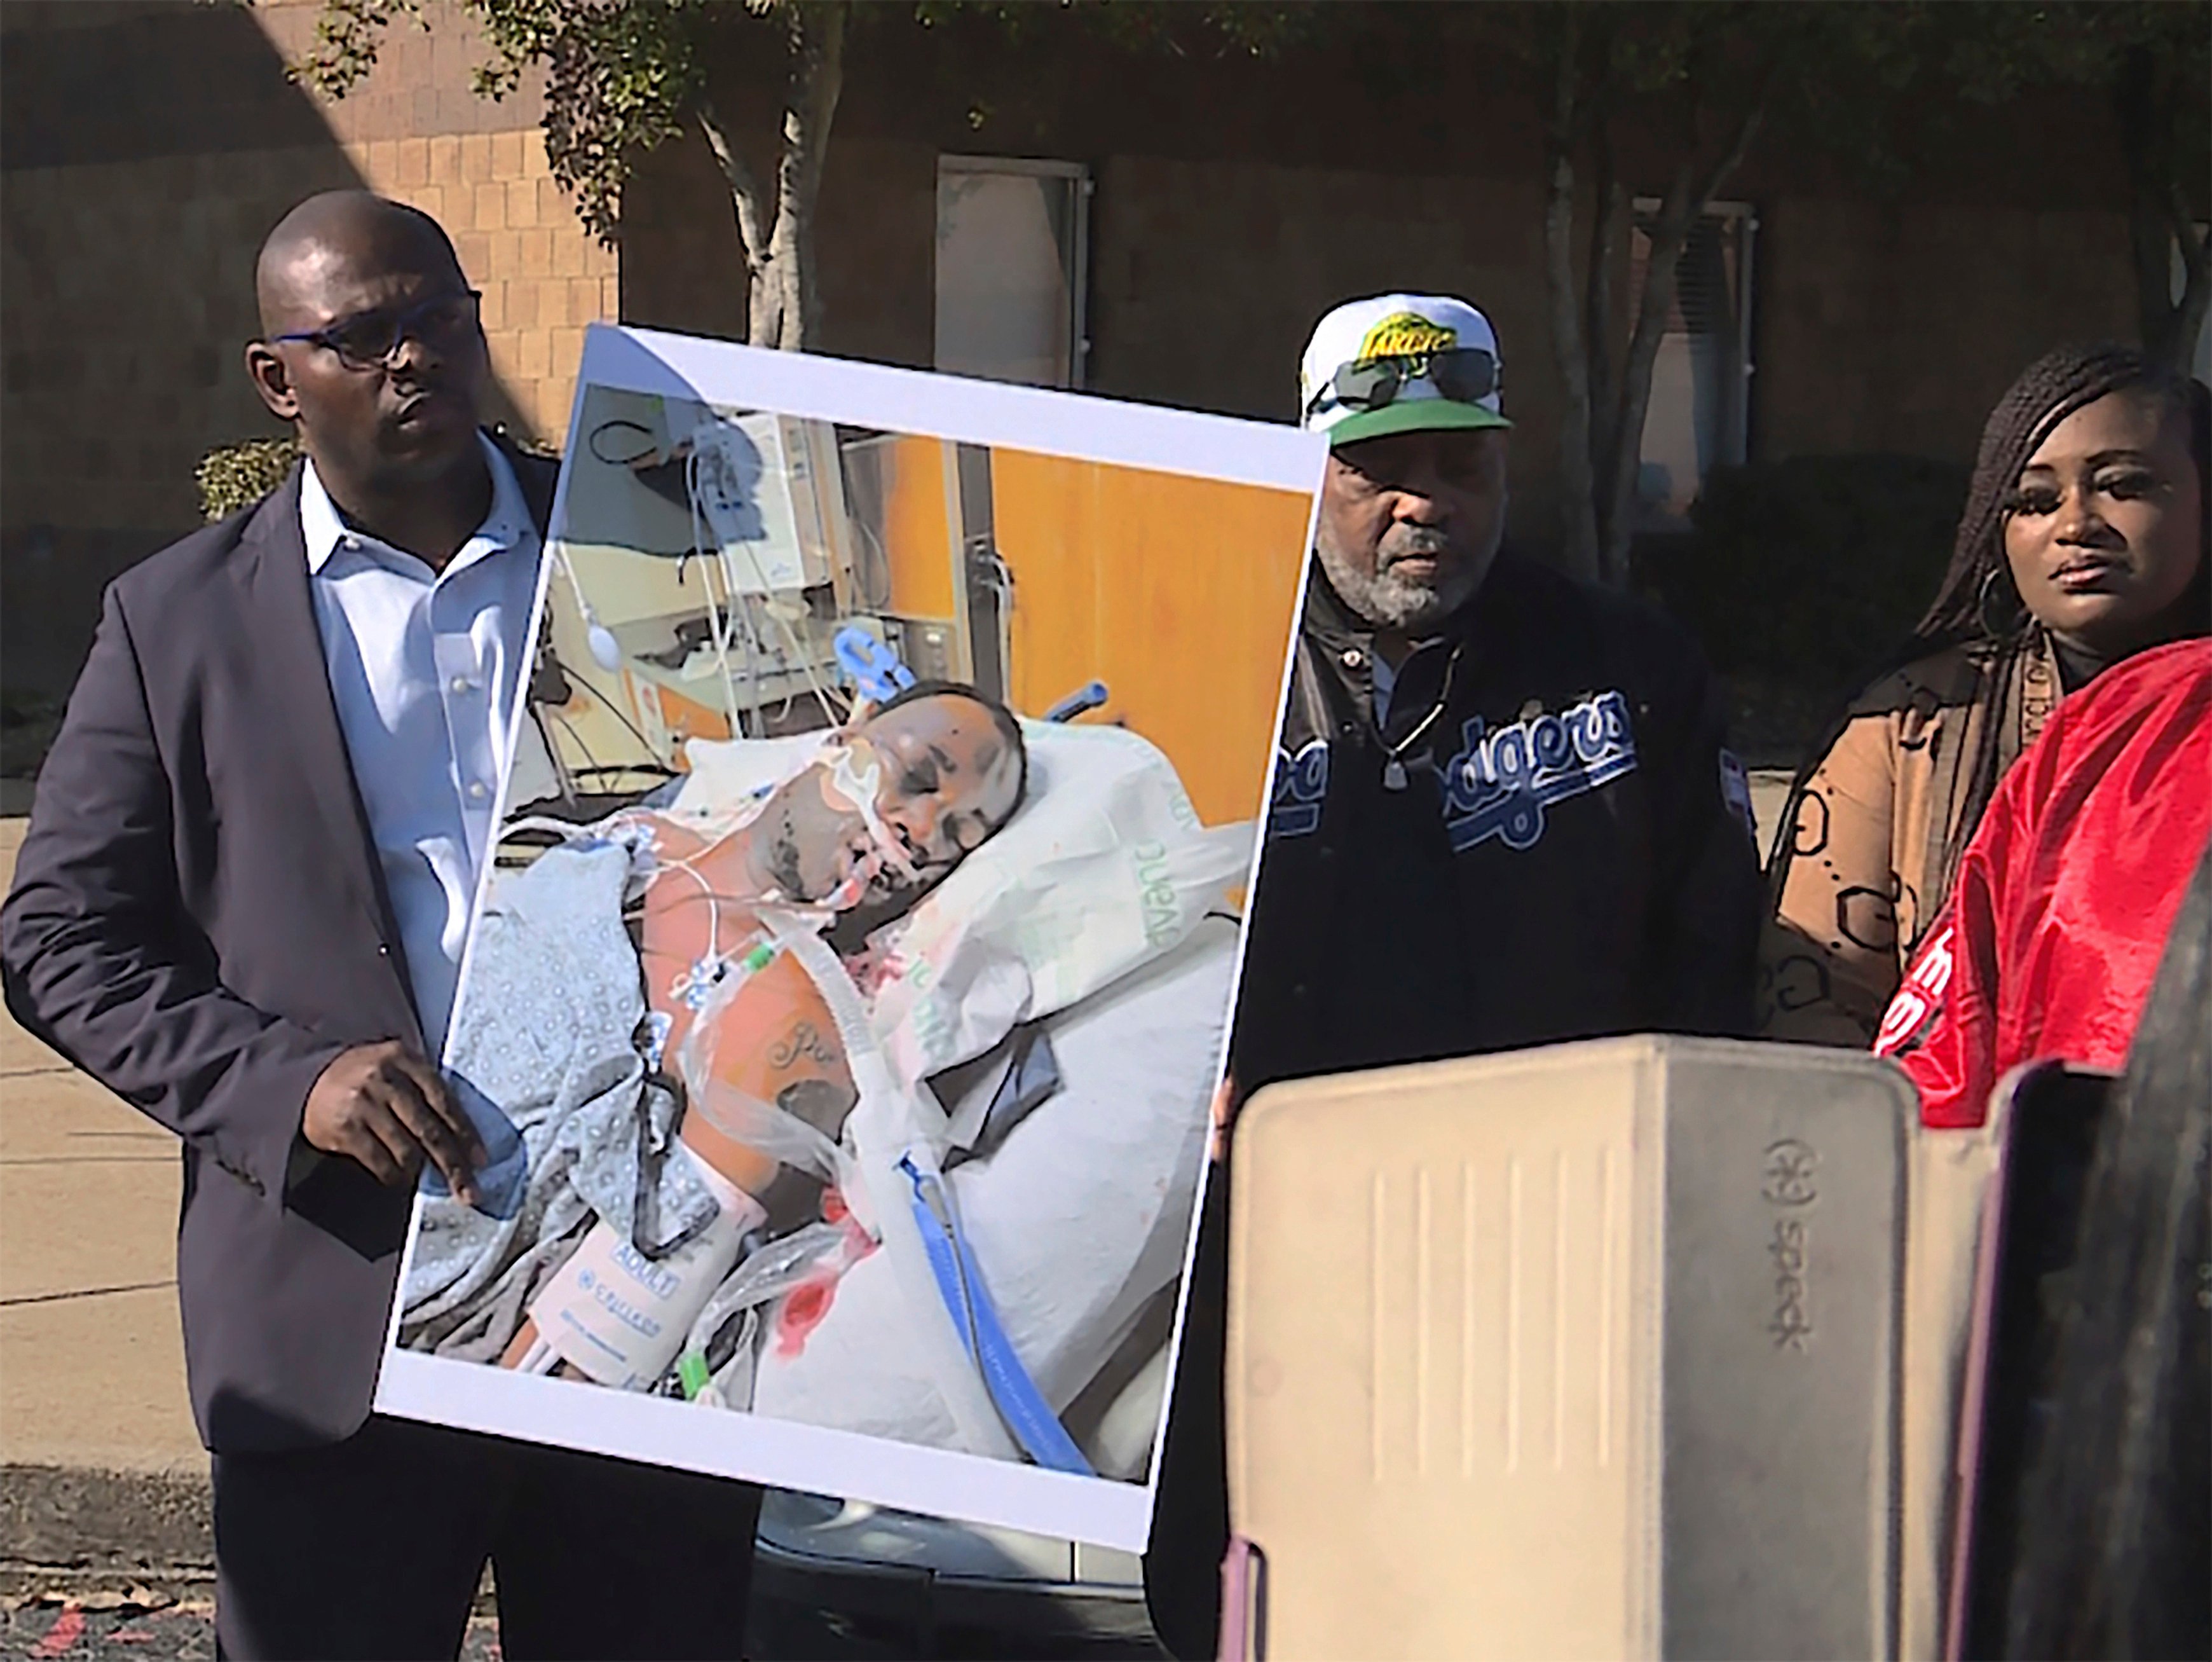 Tyre Nichols’ stepfather Rodney Wells (centre) stands next to a photo of Nichols in the hospital after his arrest during a protest in Memphis, Tennessee on January 14. Photo: WREG via AP